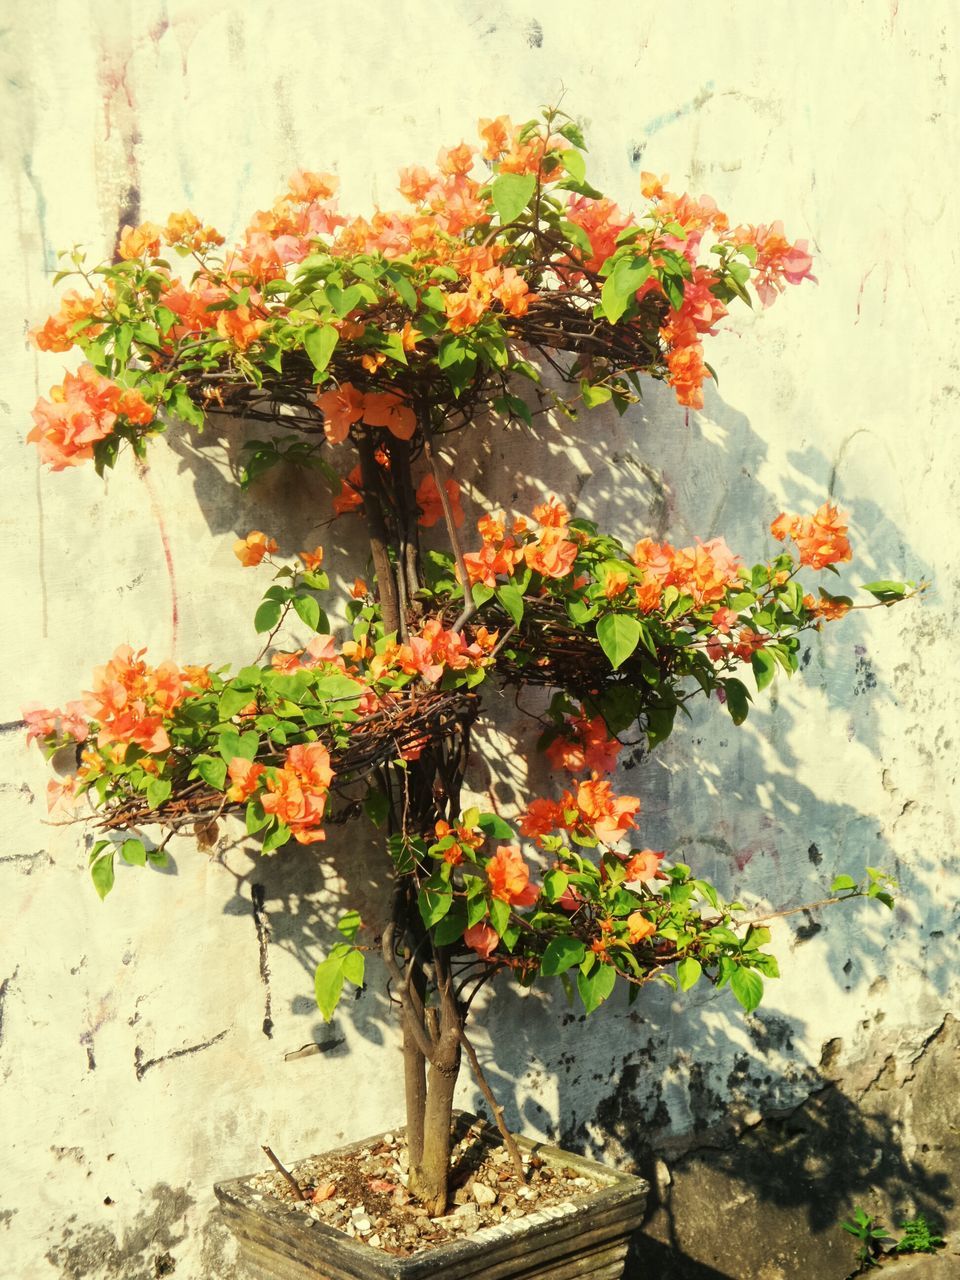 flower, plant, growth, wall - building feature, freshness, potted plant, fragility, orange color, red, leaf, nature, wall, growing, beauty in nature, petal, no people, built structure, day, outdoors, flower pot